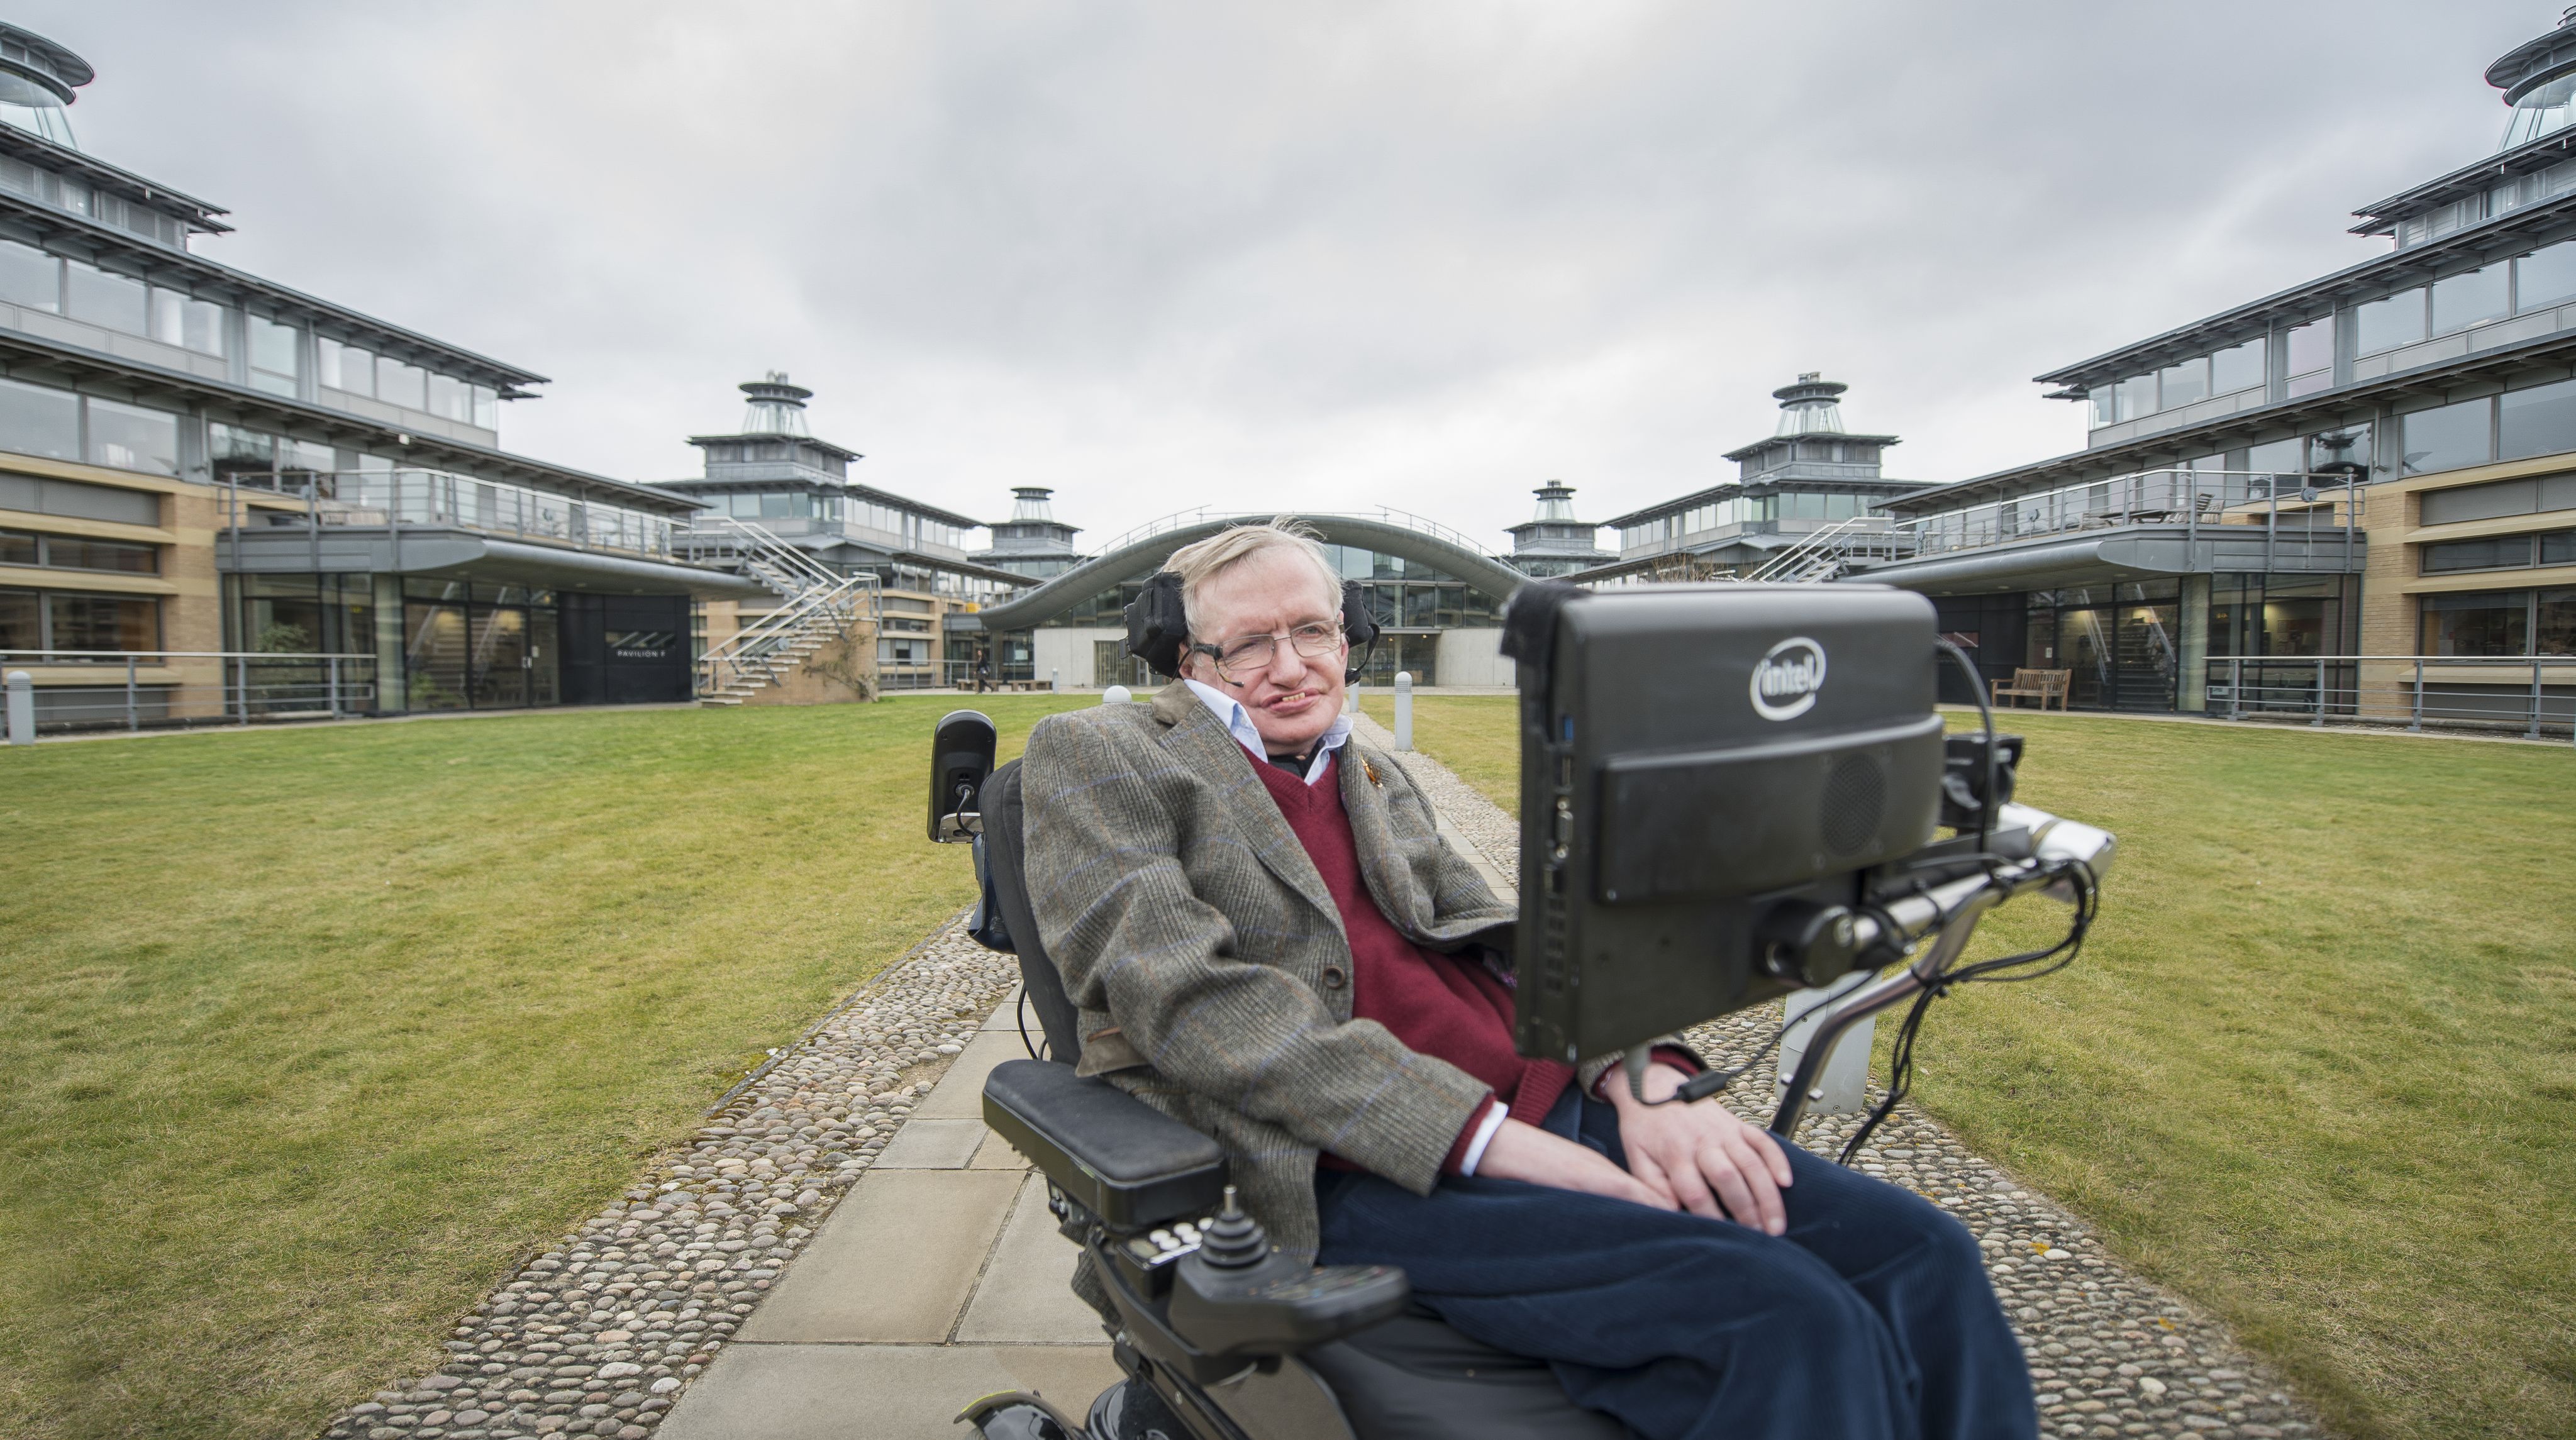 Professor Hawking pictured outside the Department of Applied Mathematics and Theoretical Physics, University of Cambridge. Credit: Andre Pattenden